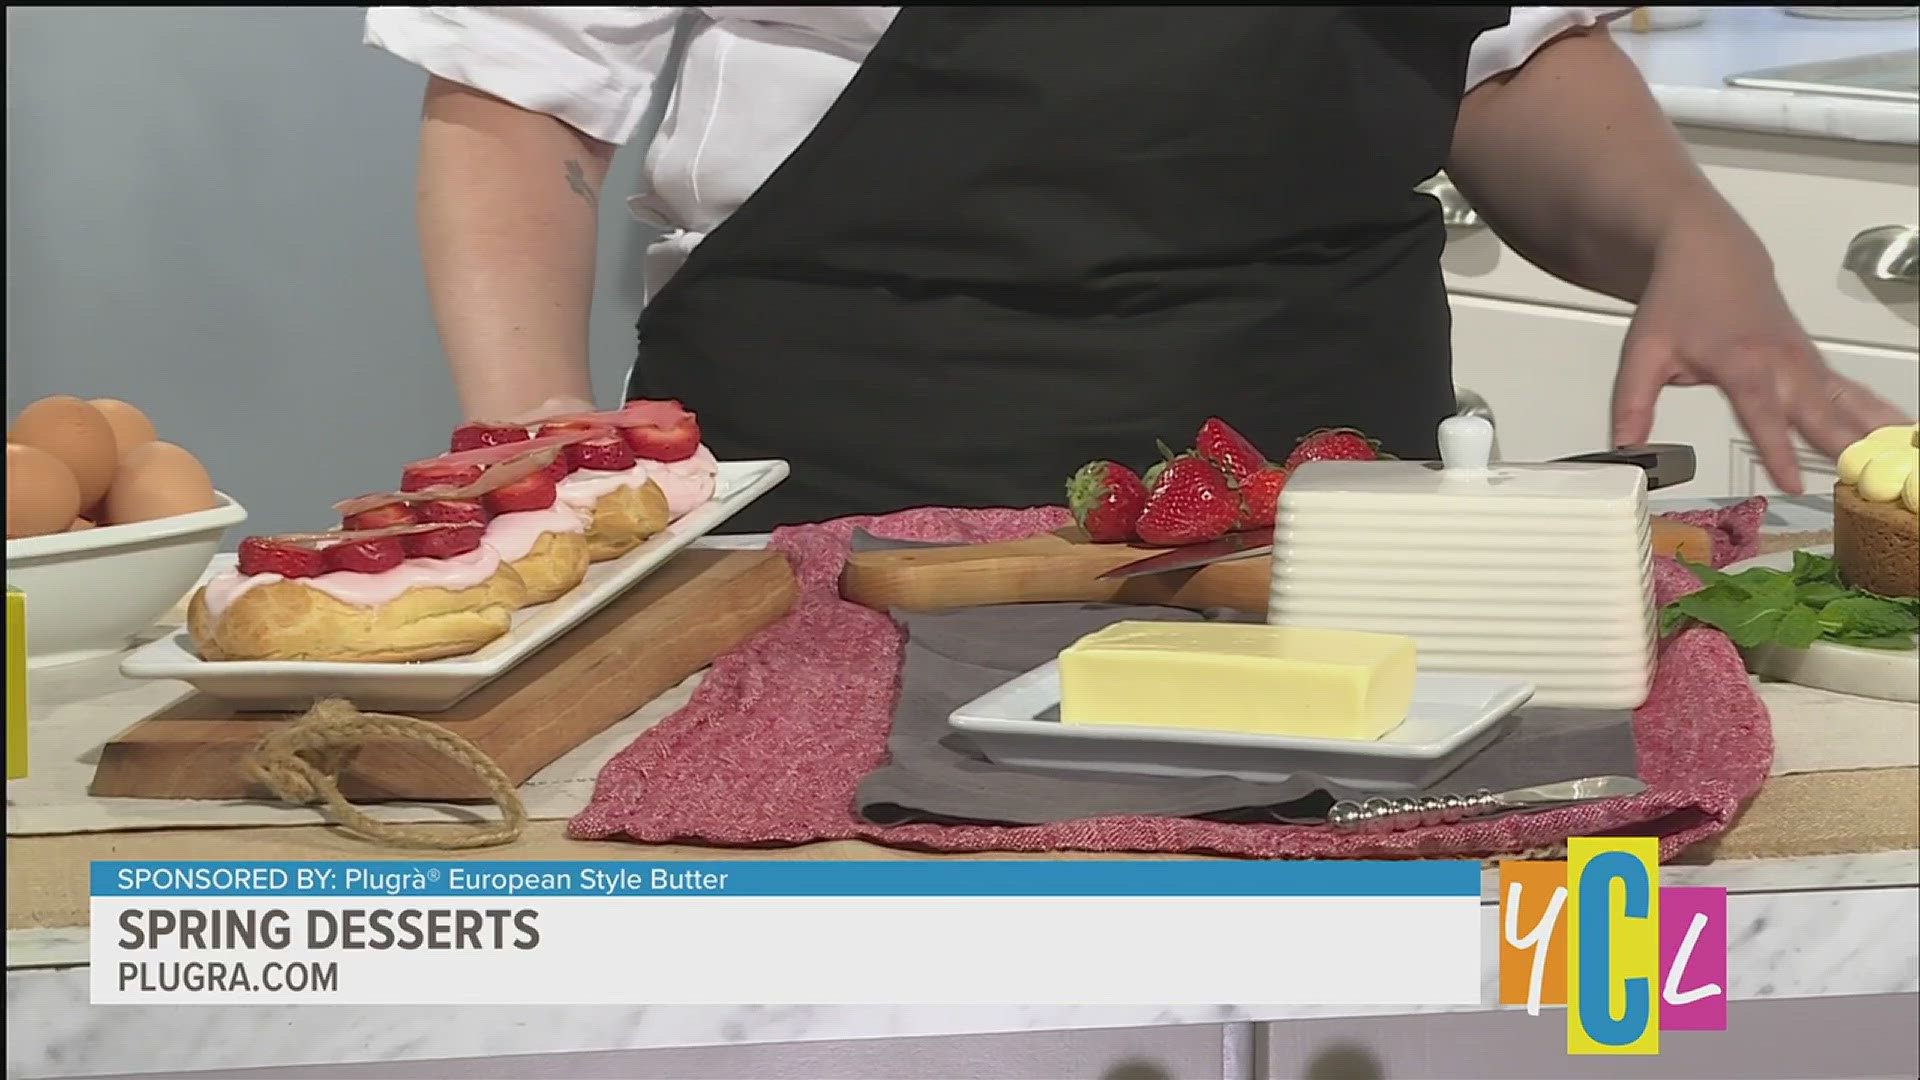 Elevate your baking game just in time for Spring sweets! This segment paid for by Plugrà® European Style Butter.